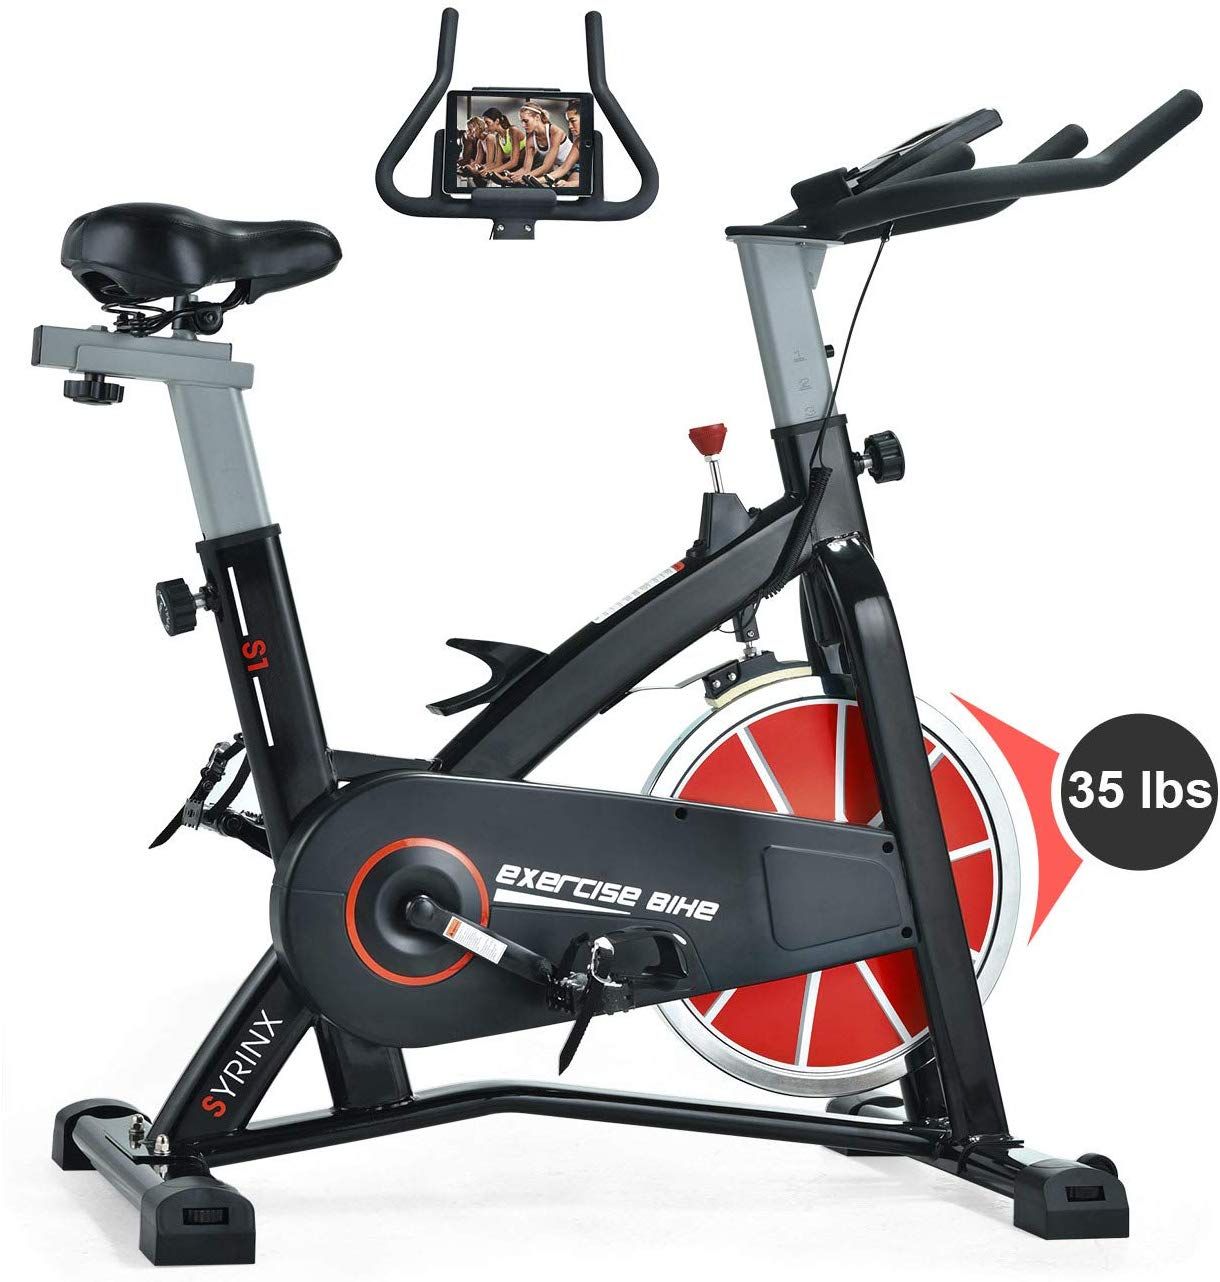 Best Exercise Bike Buyers Guide 2020 — ReviewThis